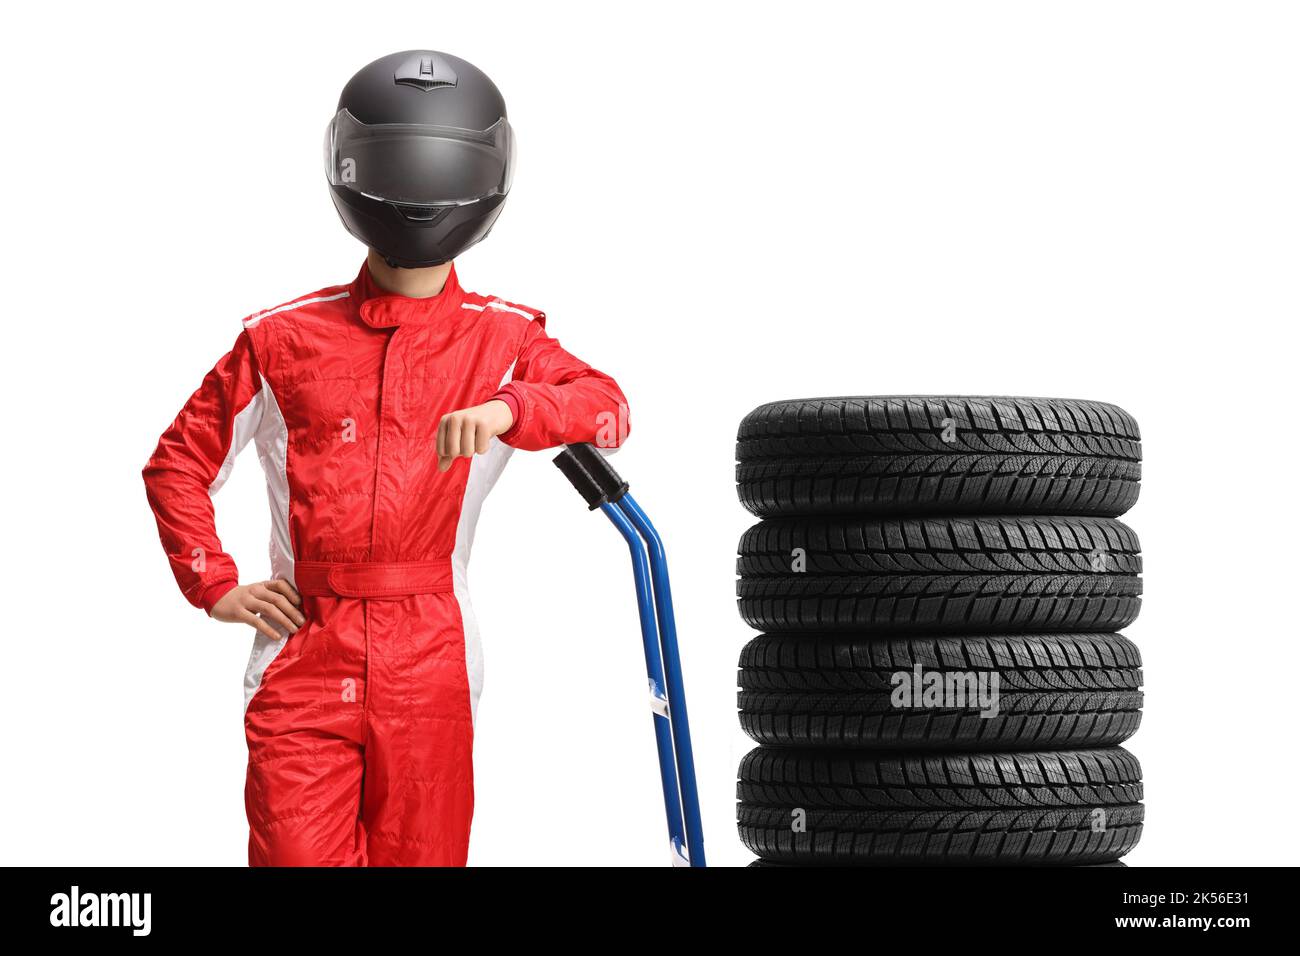 Car racer with a helmet and suit leaning on a hand truck with tires isolated on white background Stock Photo